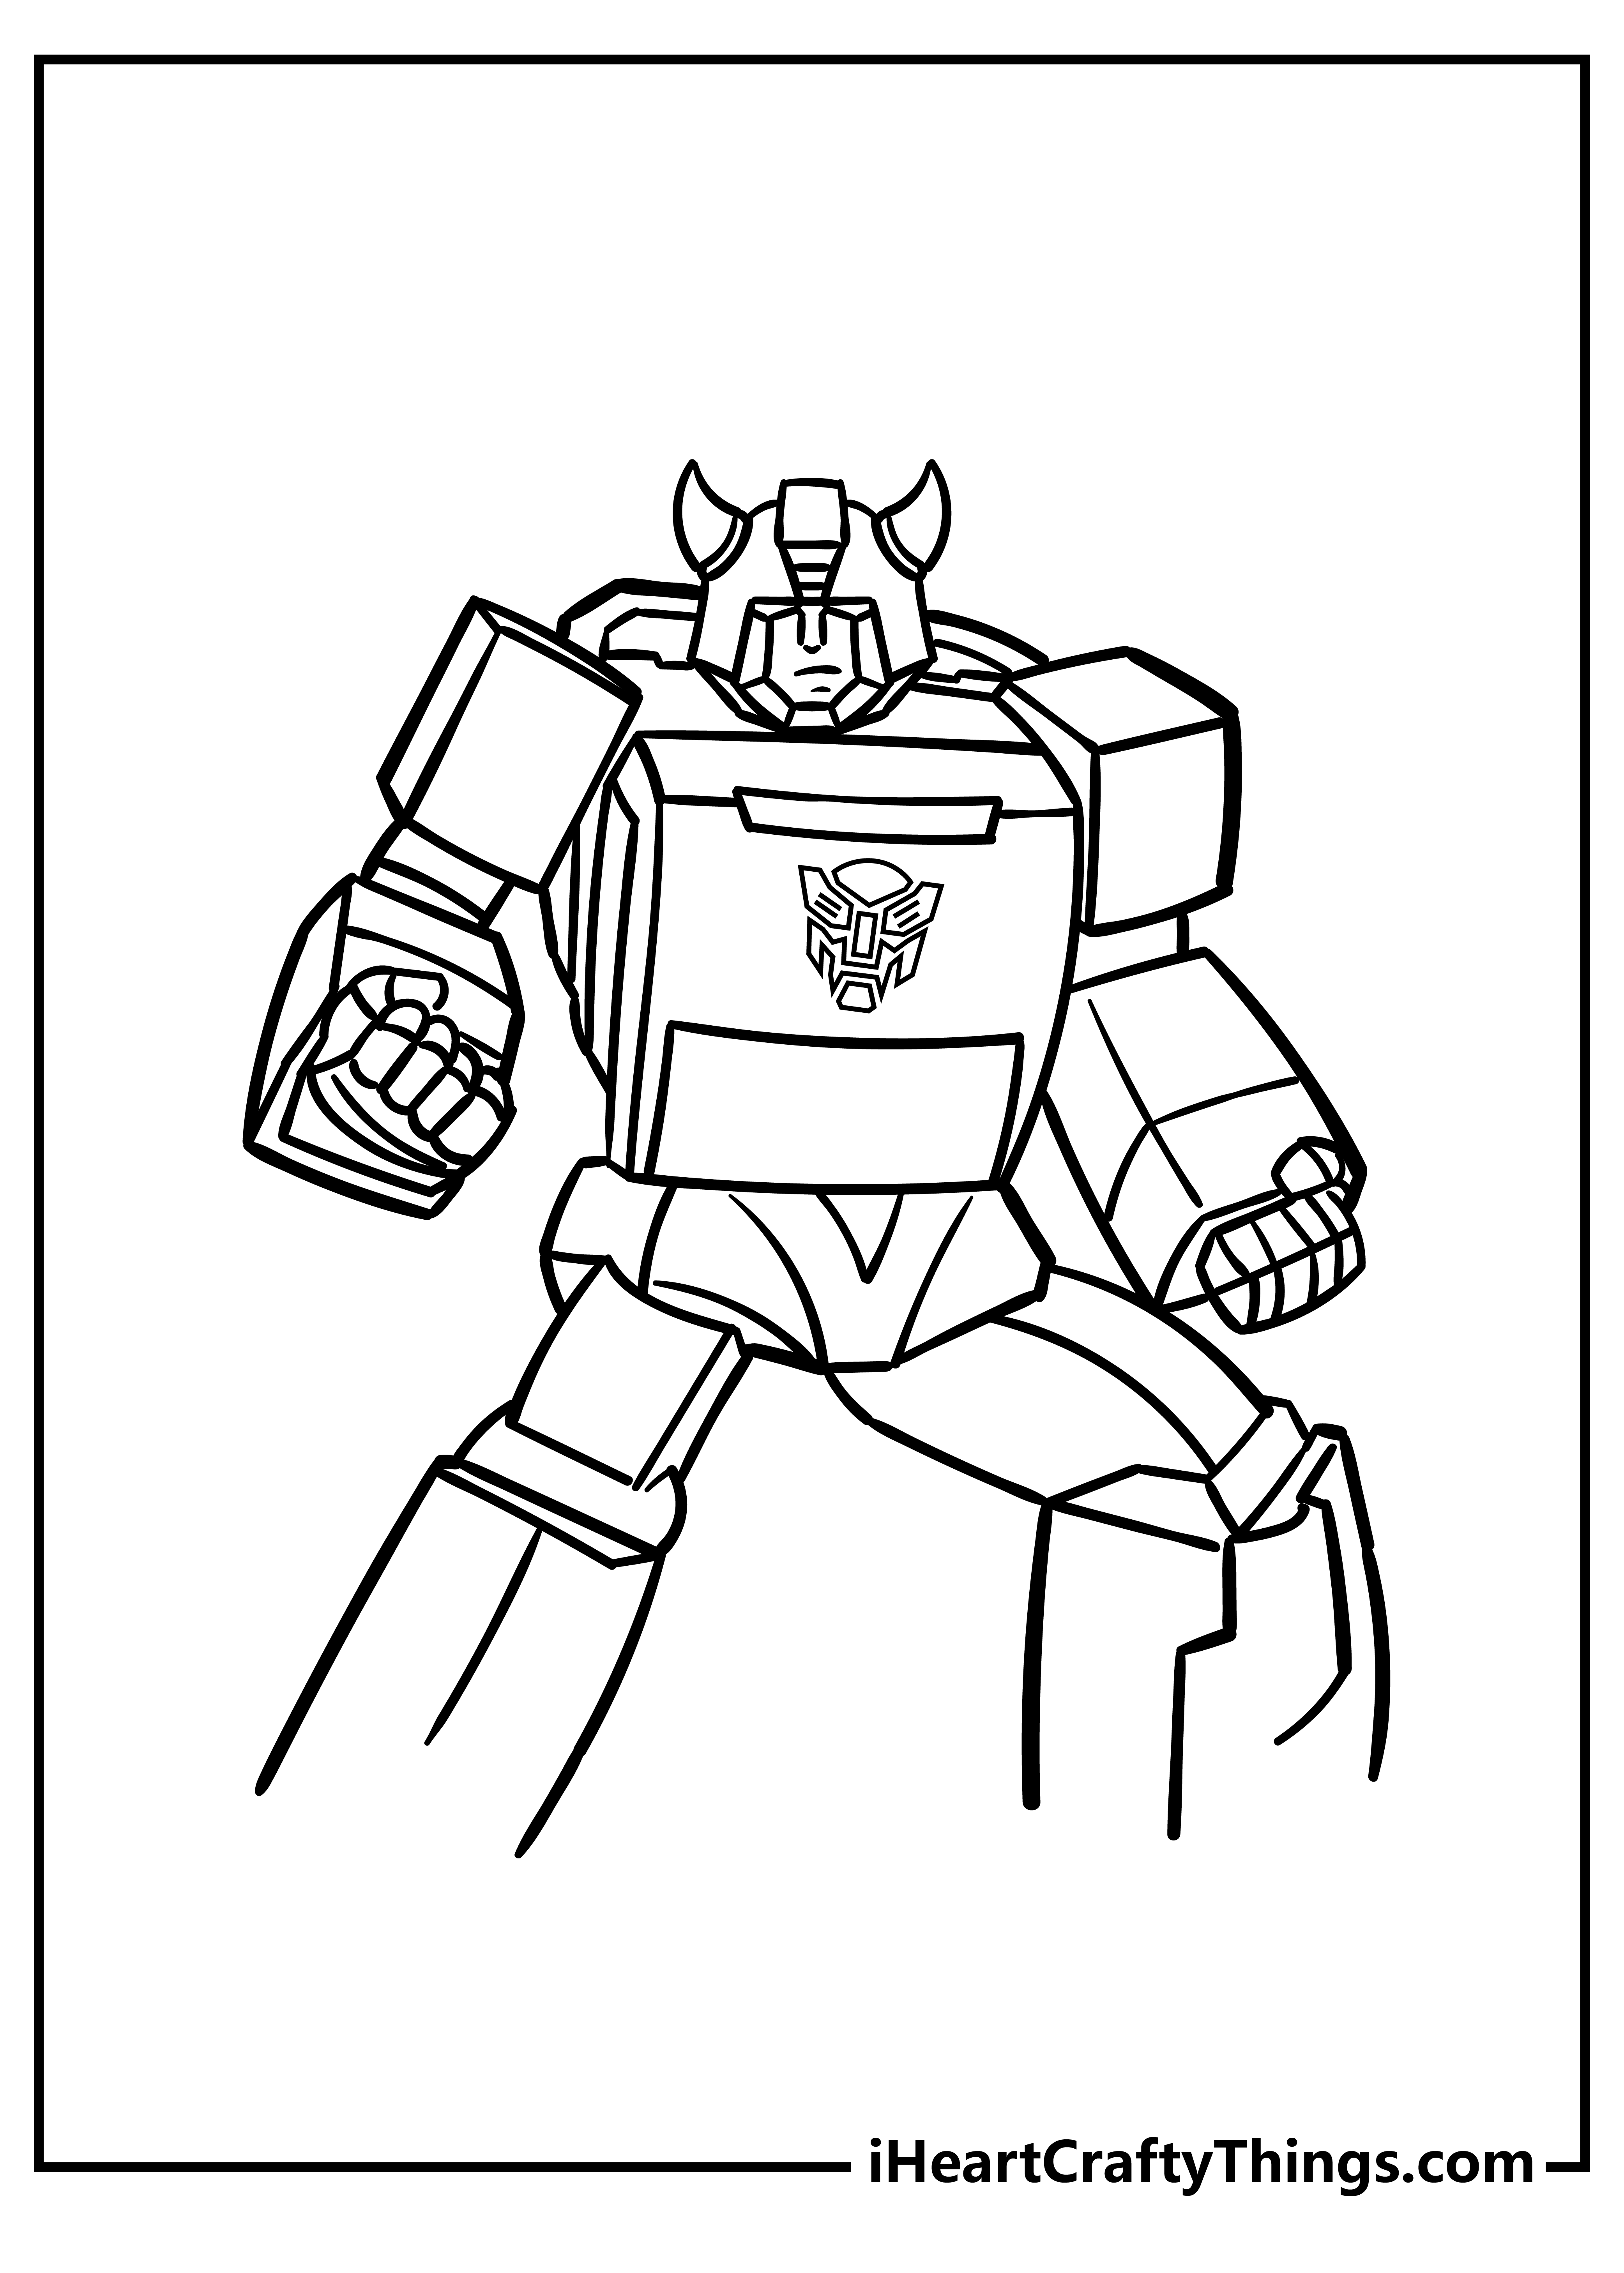 Bumblebee Coloring Pages free printable